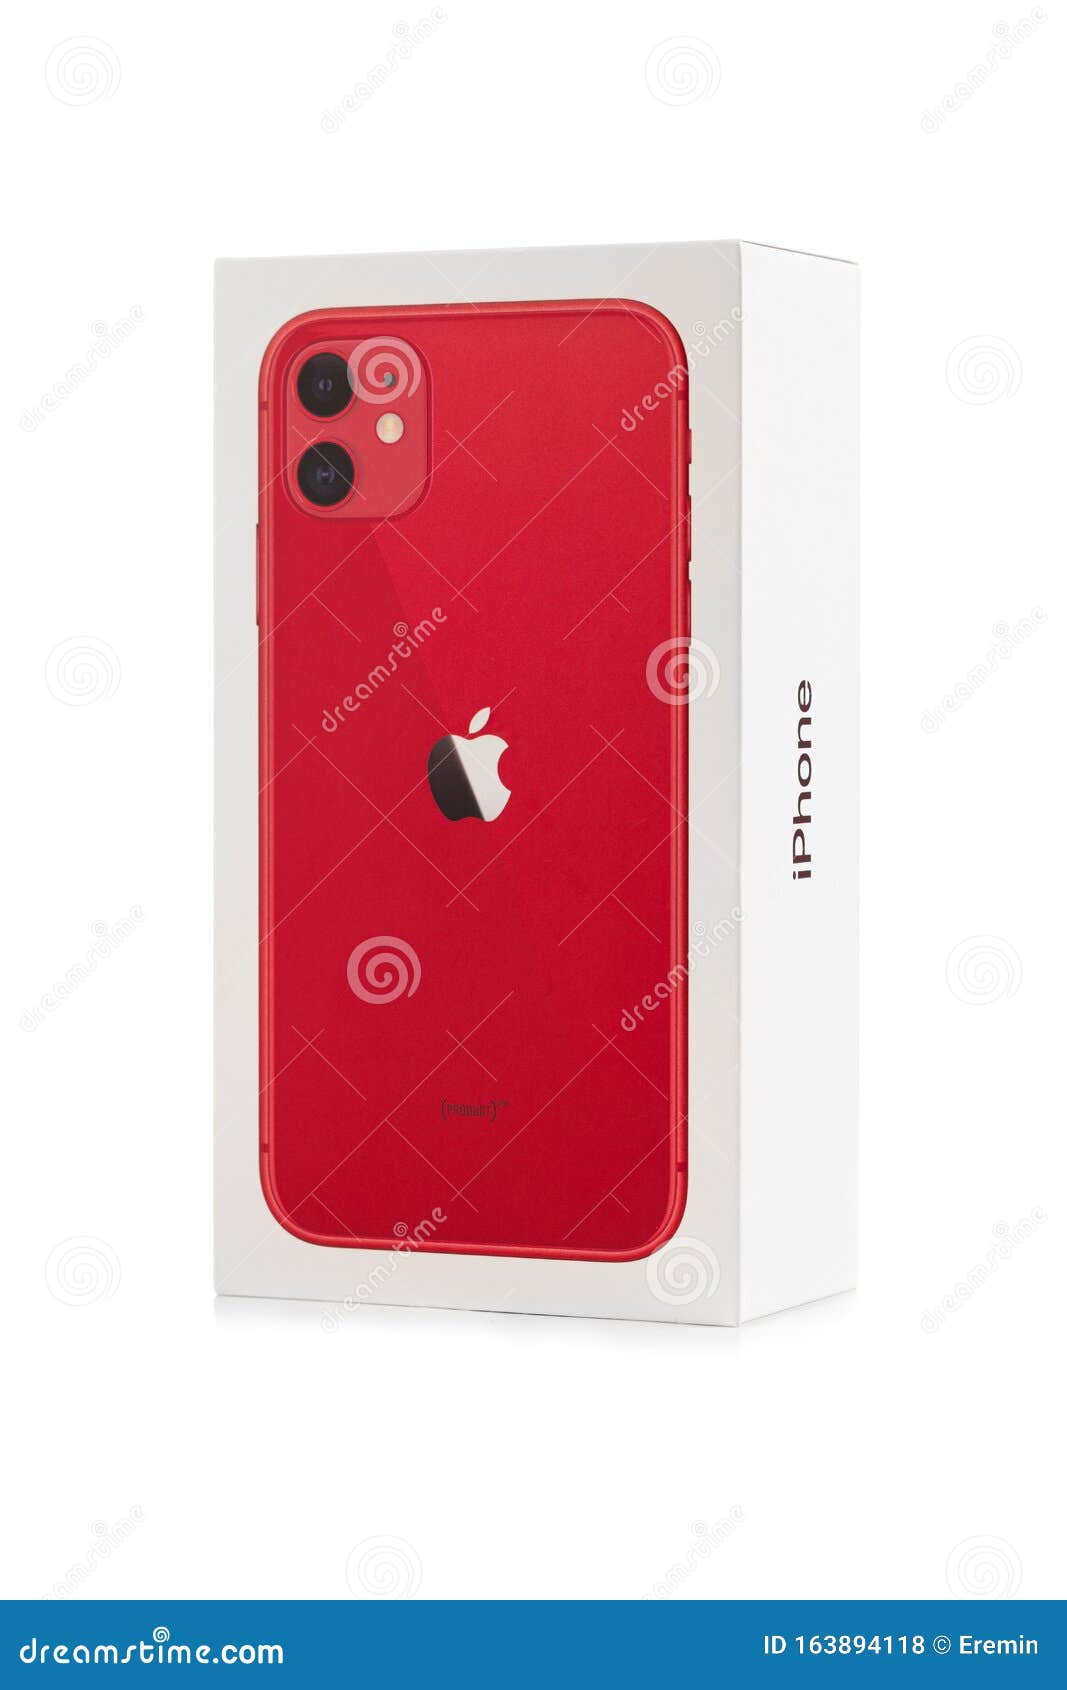 Apple IPhone 11 PRODUCT RED on a White Background. Editorial Stock Photo -  Image of cellular, luxury: 163894118